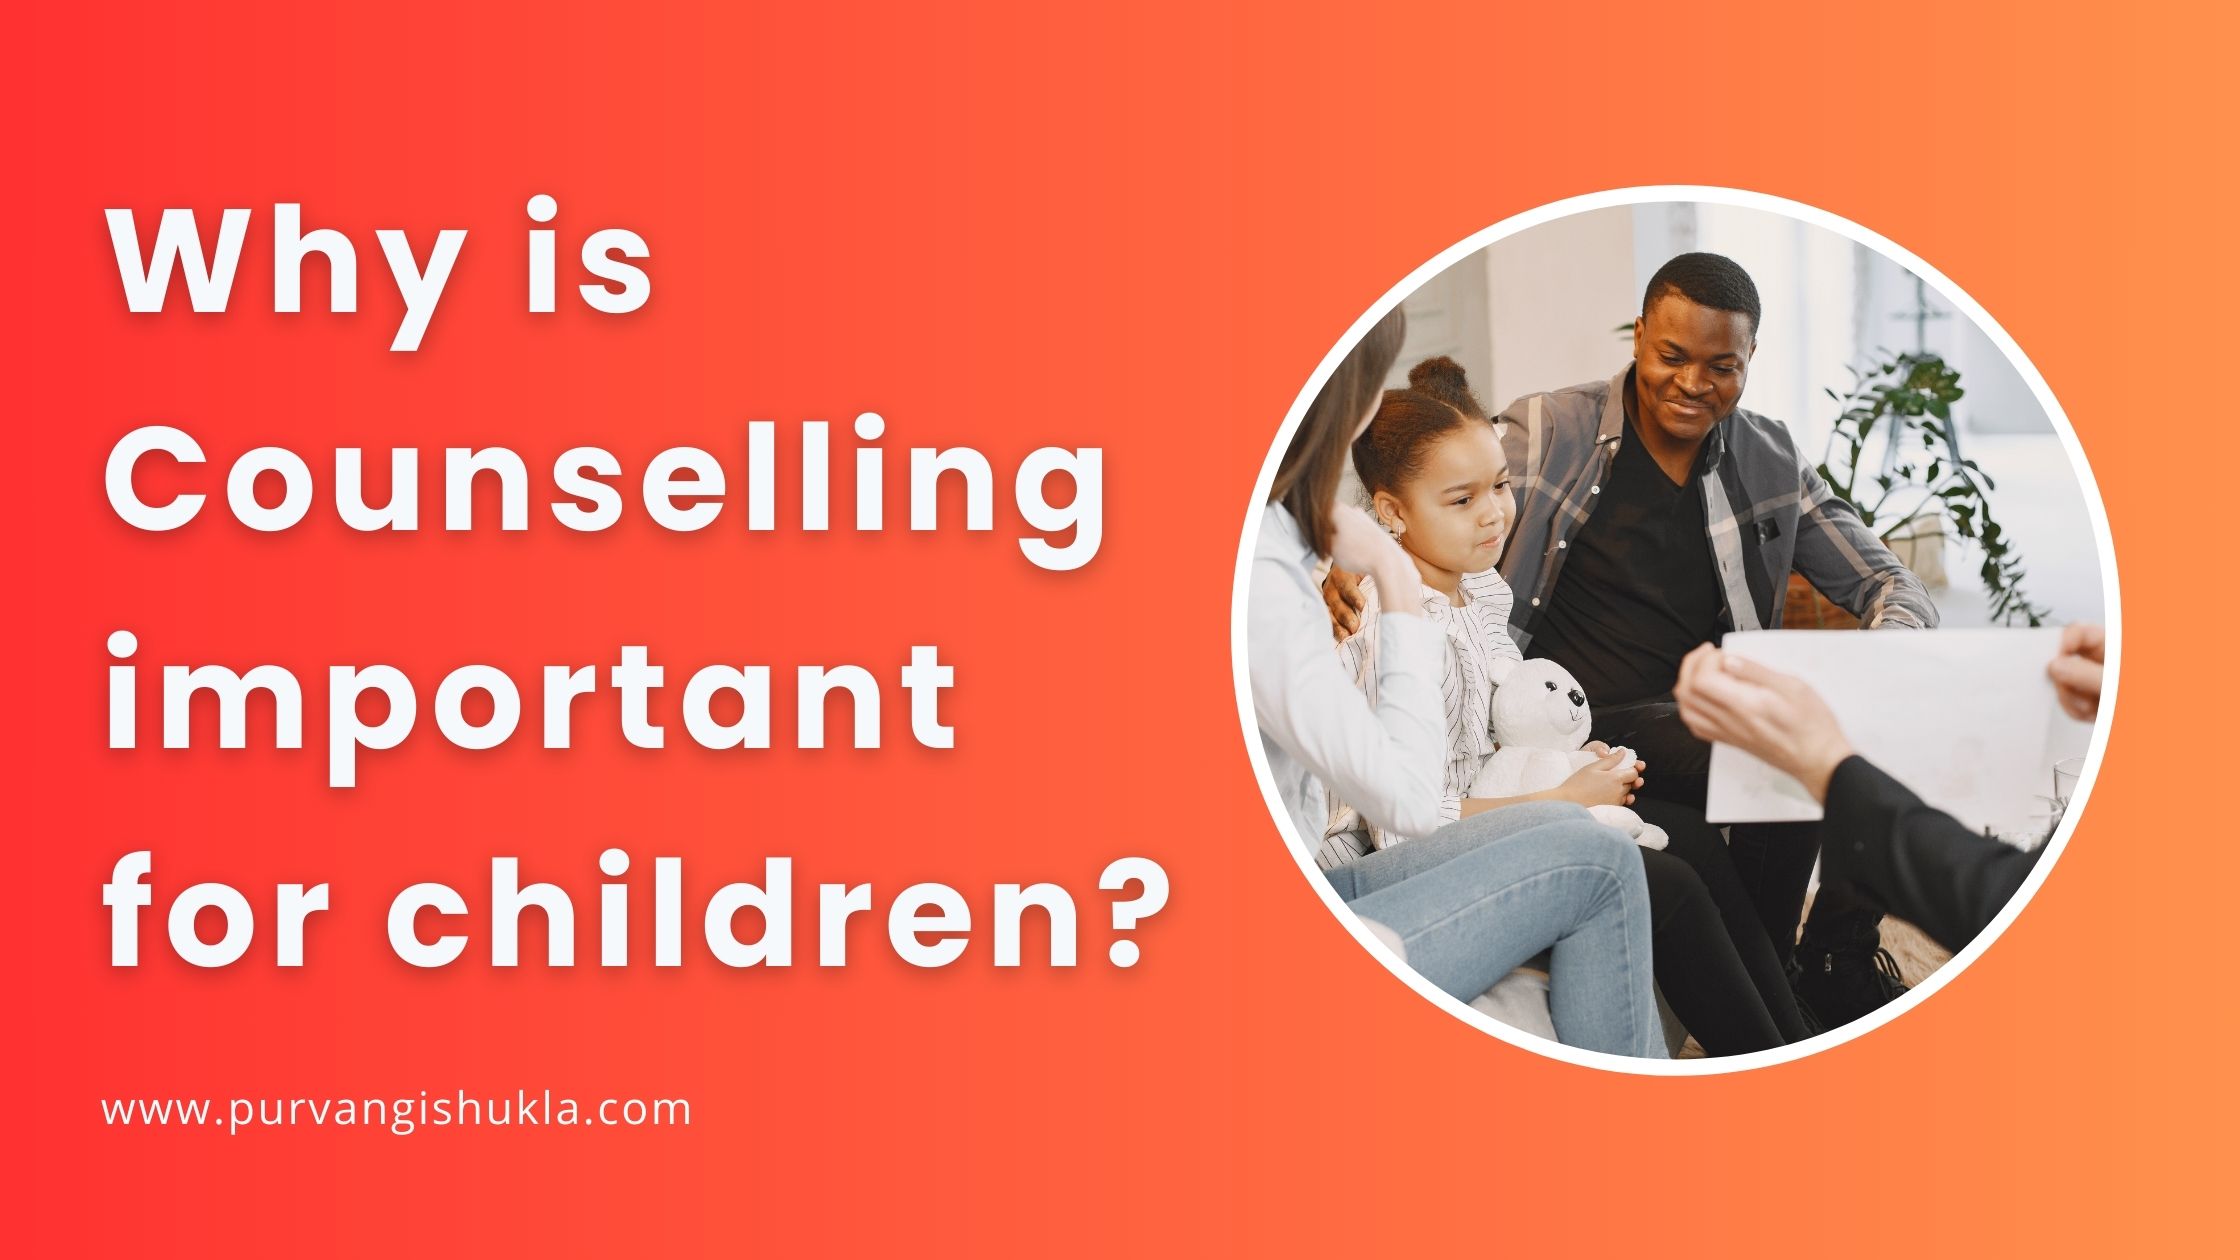 Why is Counselling important for children